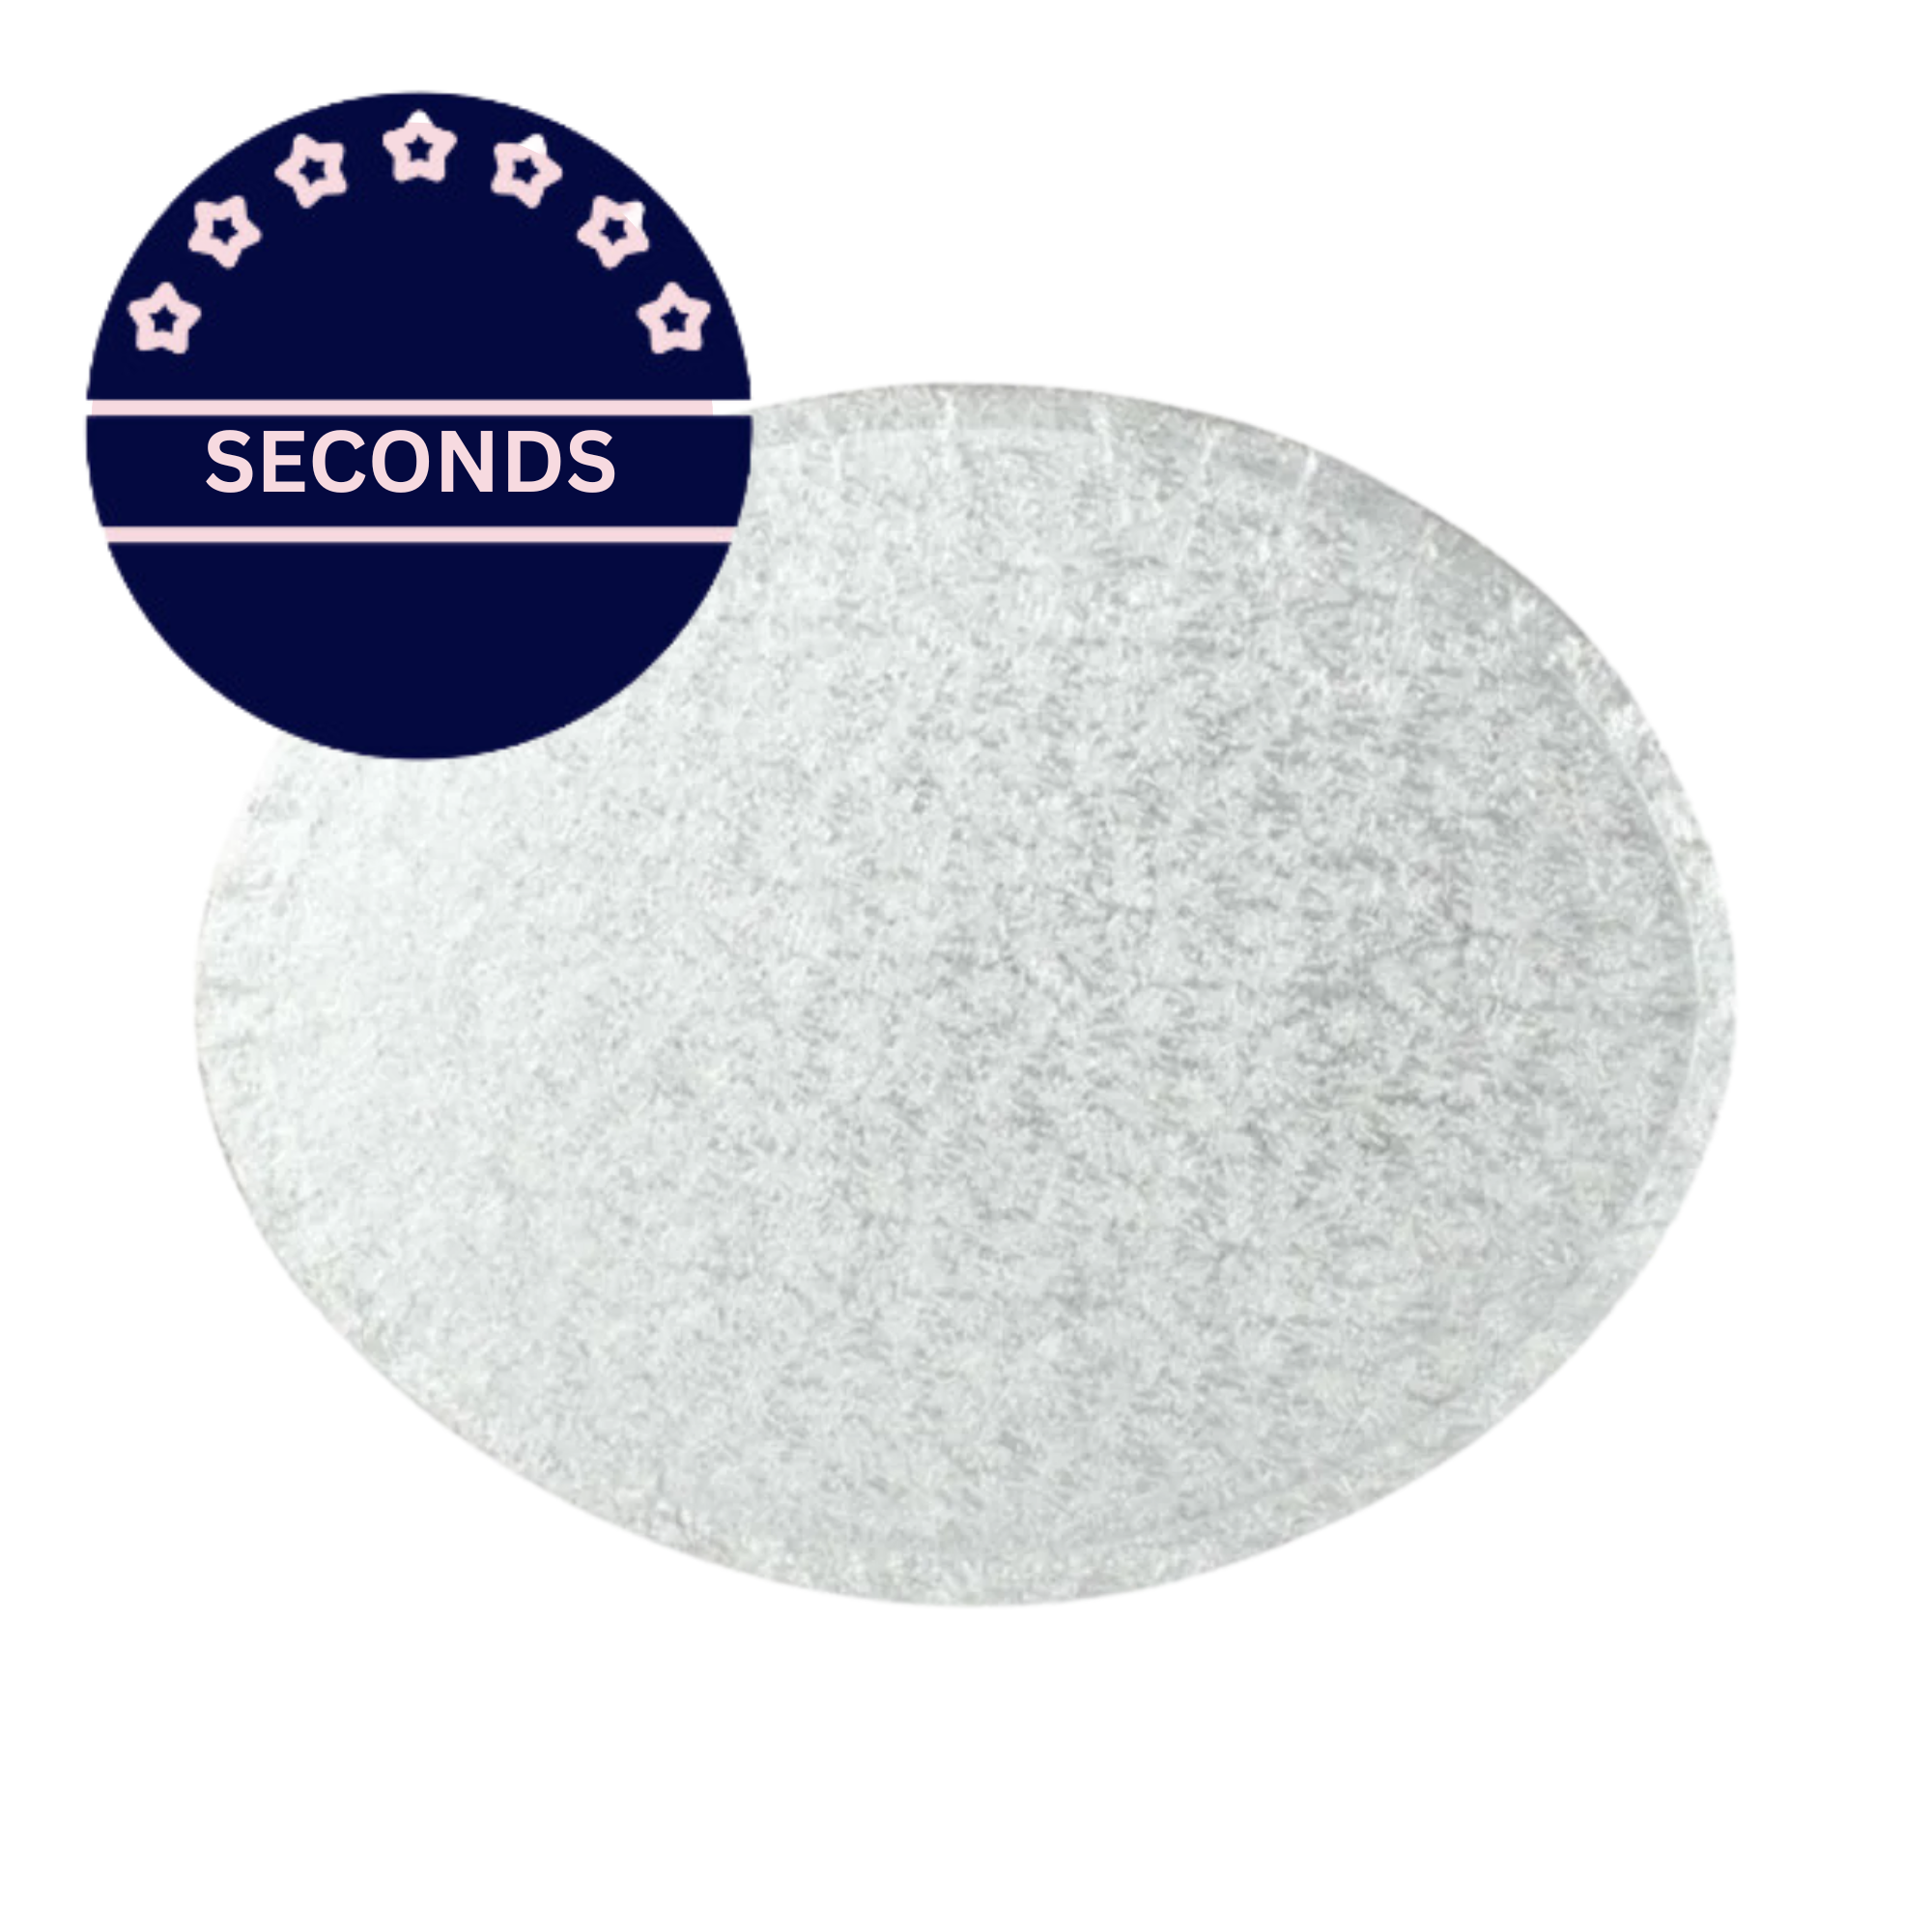 SECONDS - Oval Cake Drum 12mm Thick Cake Board - Silver - 14" x 12"